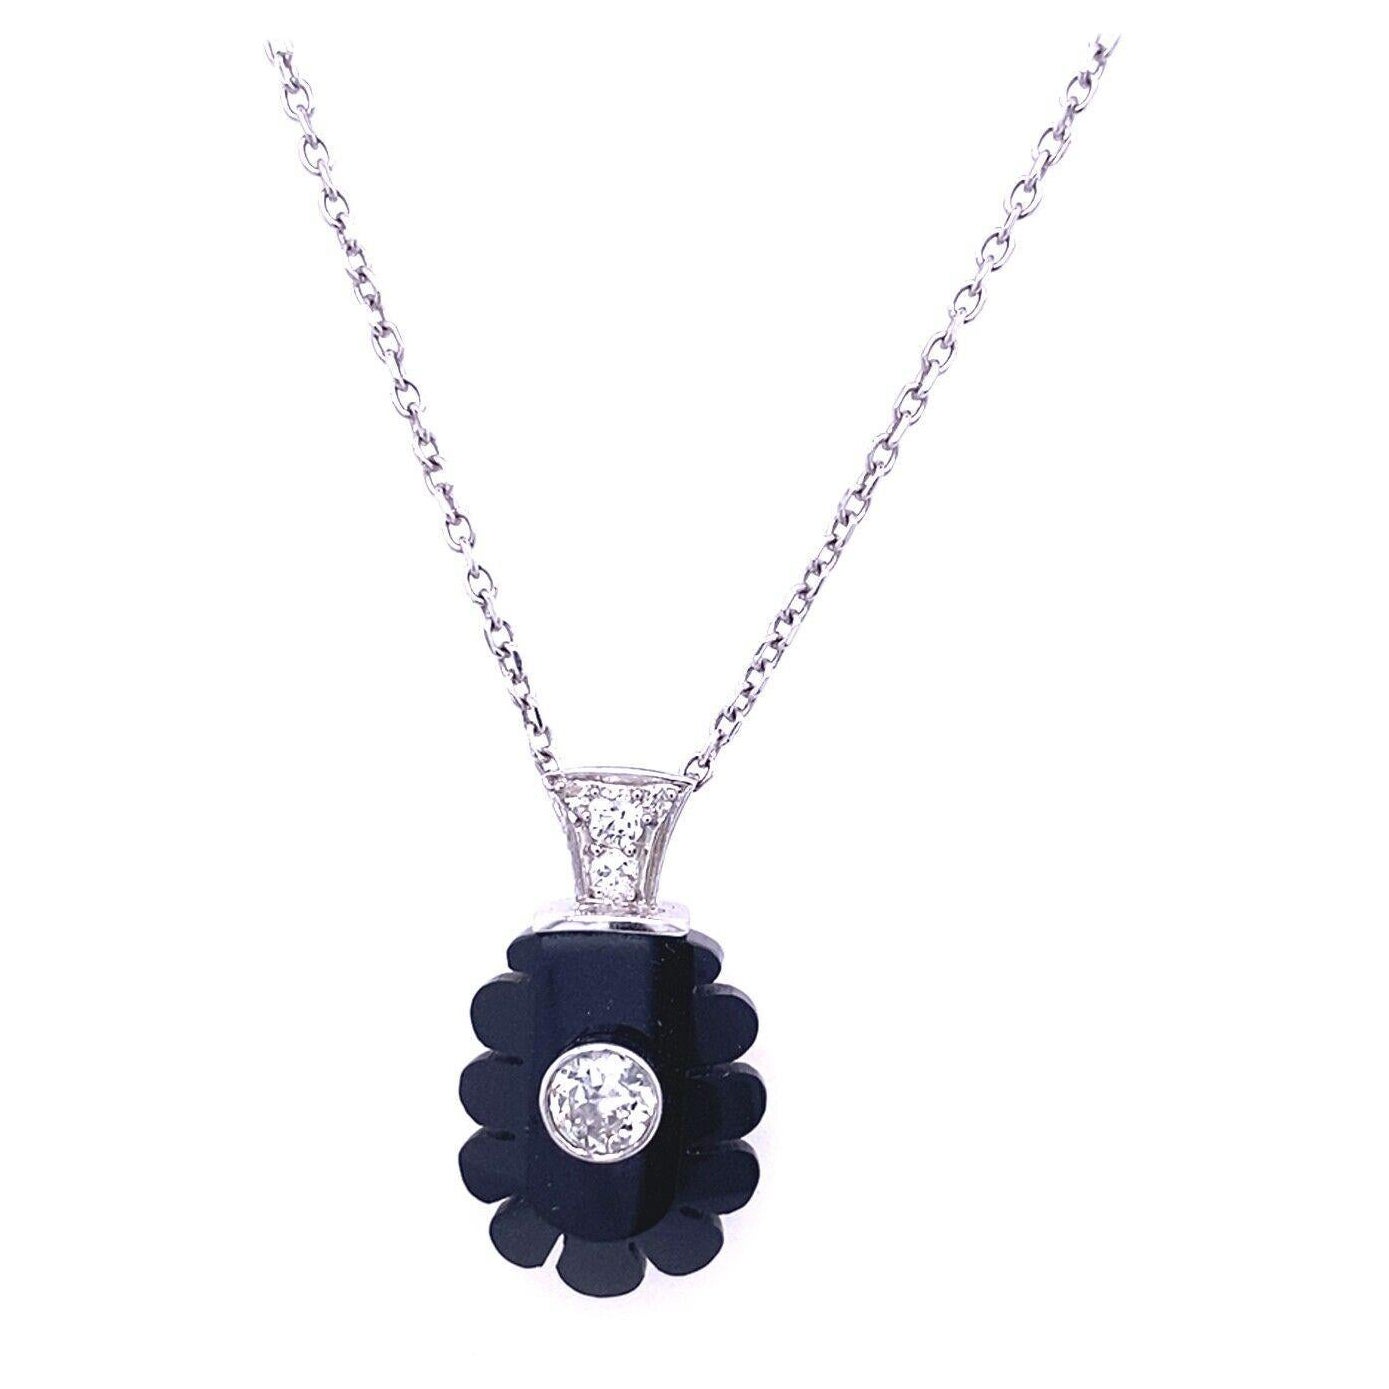 Carved Jet Pendant Set with 0.30ct Diamond in 18ct White Gold with Chain